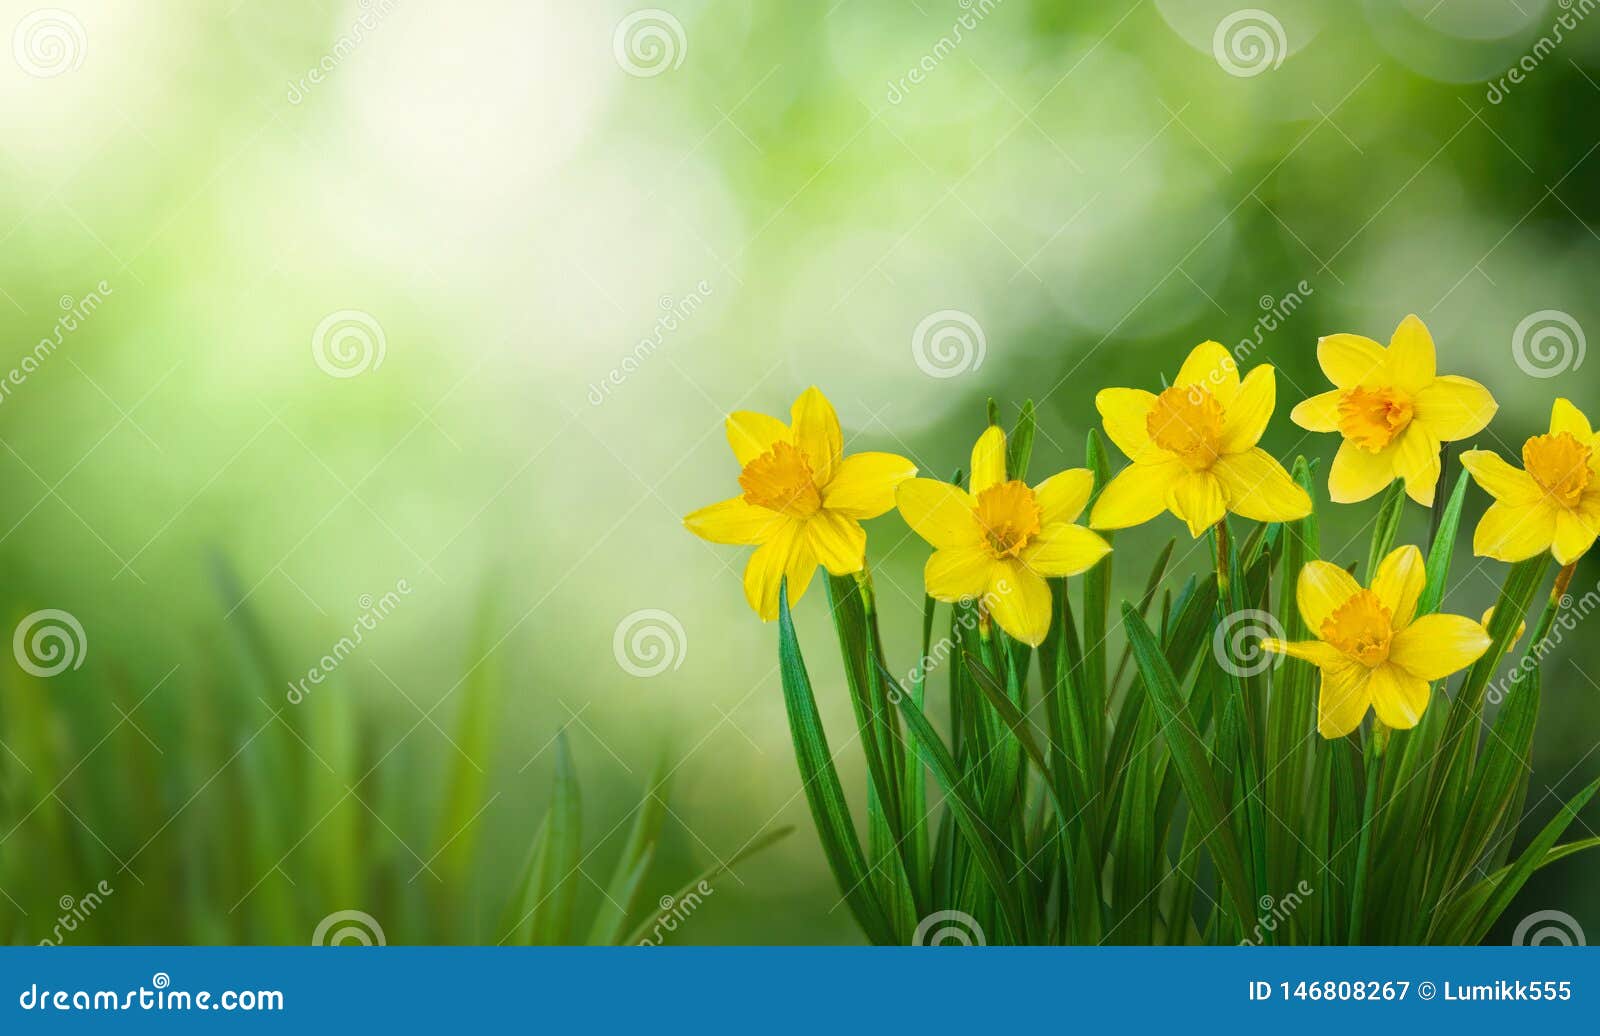 nature spring background with blooming daffodil flowers